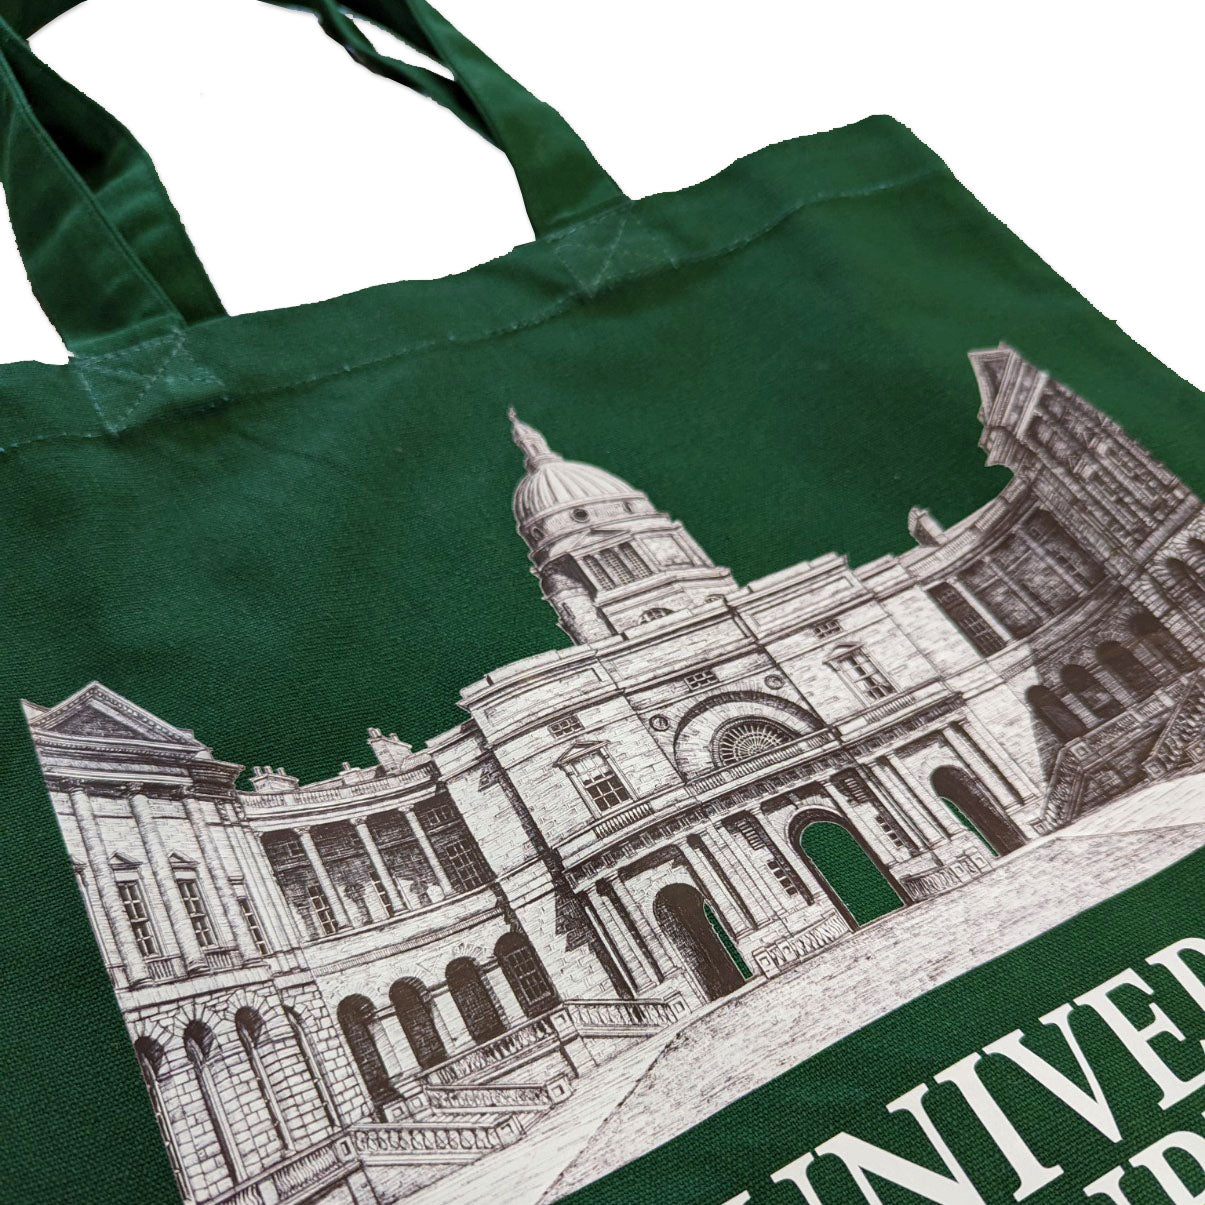 Close up of the Old College Building design on the green tote.